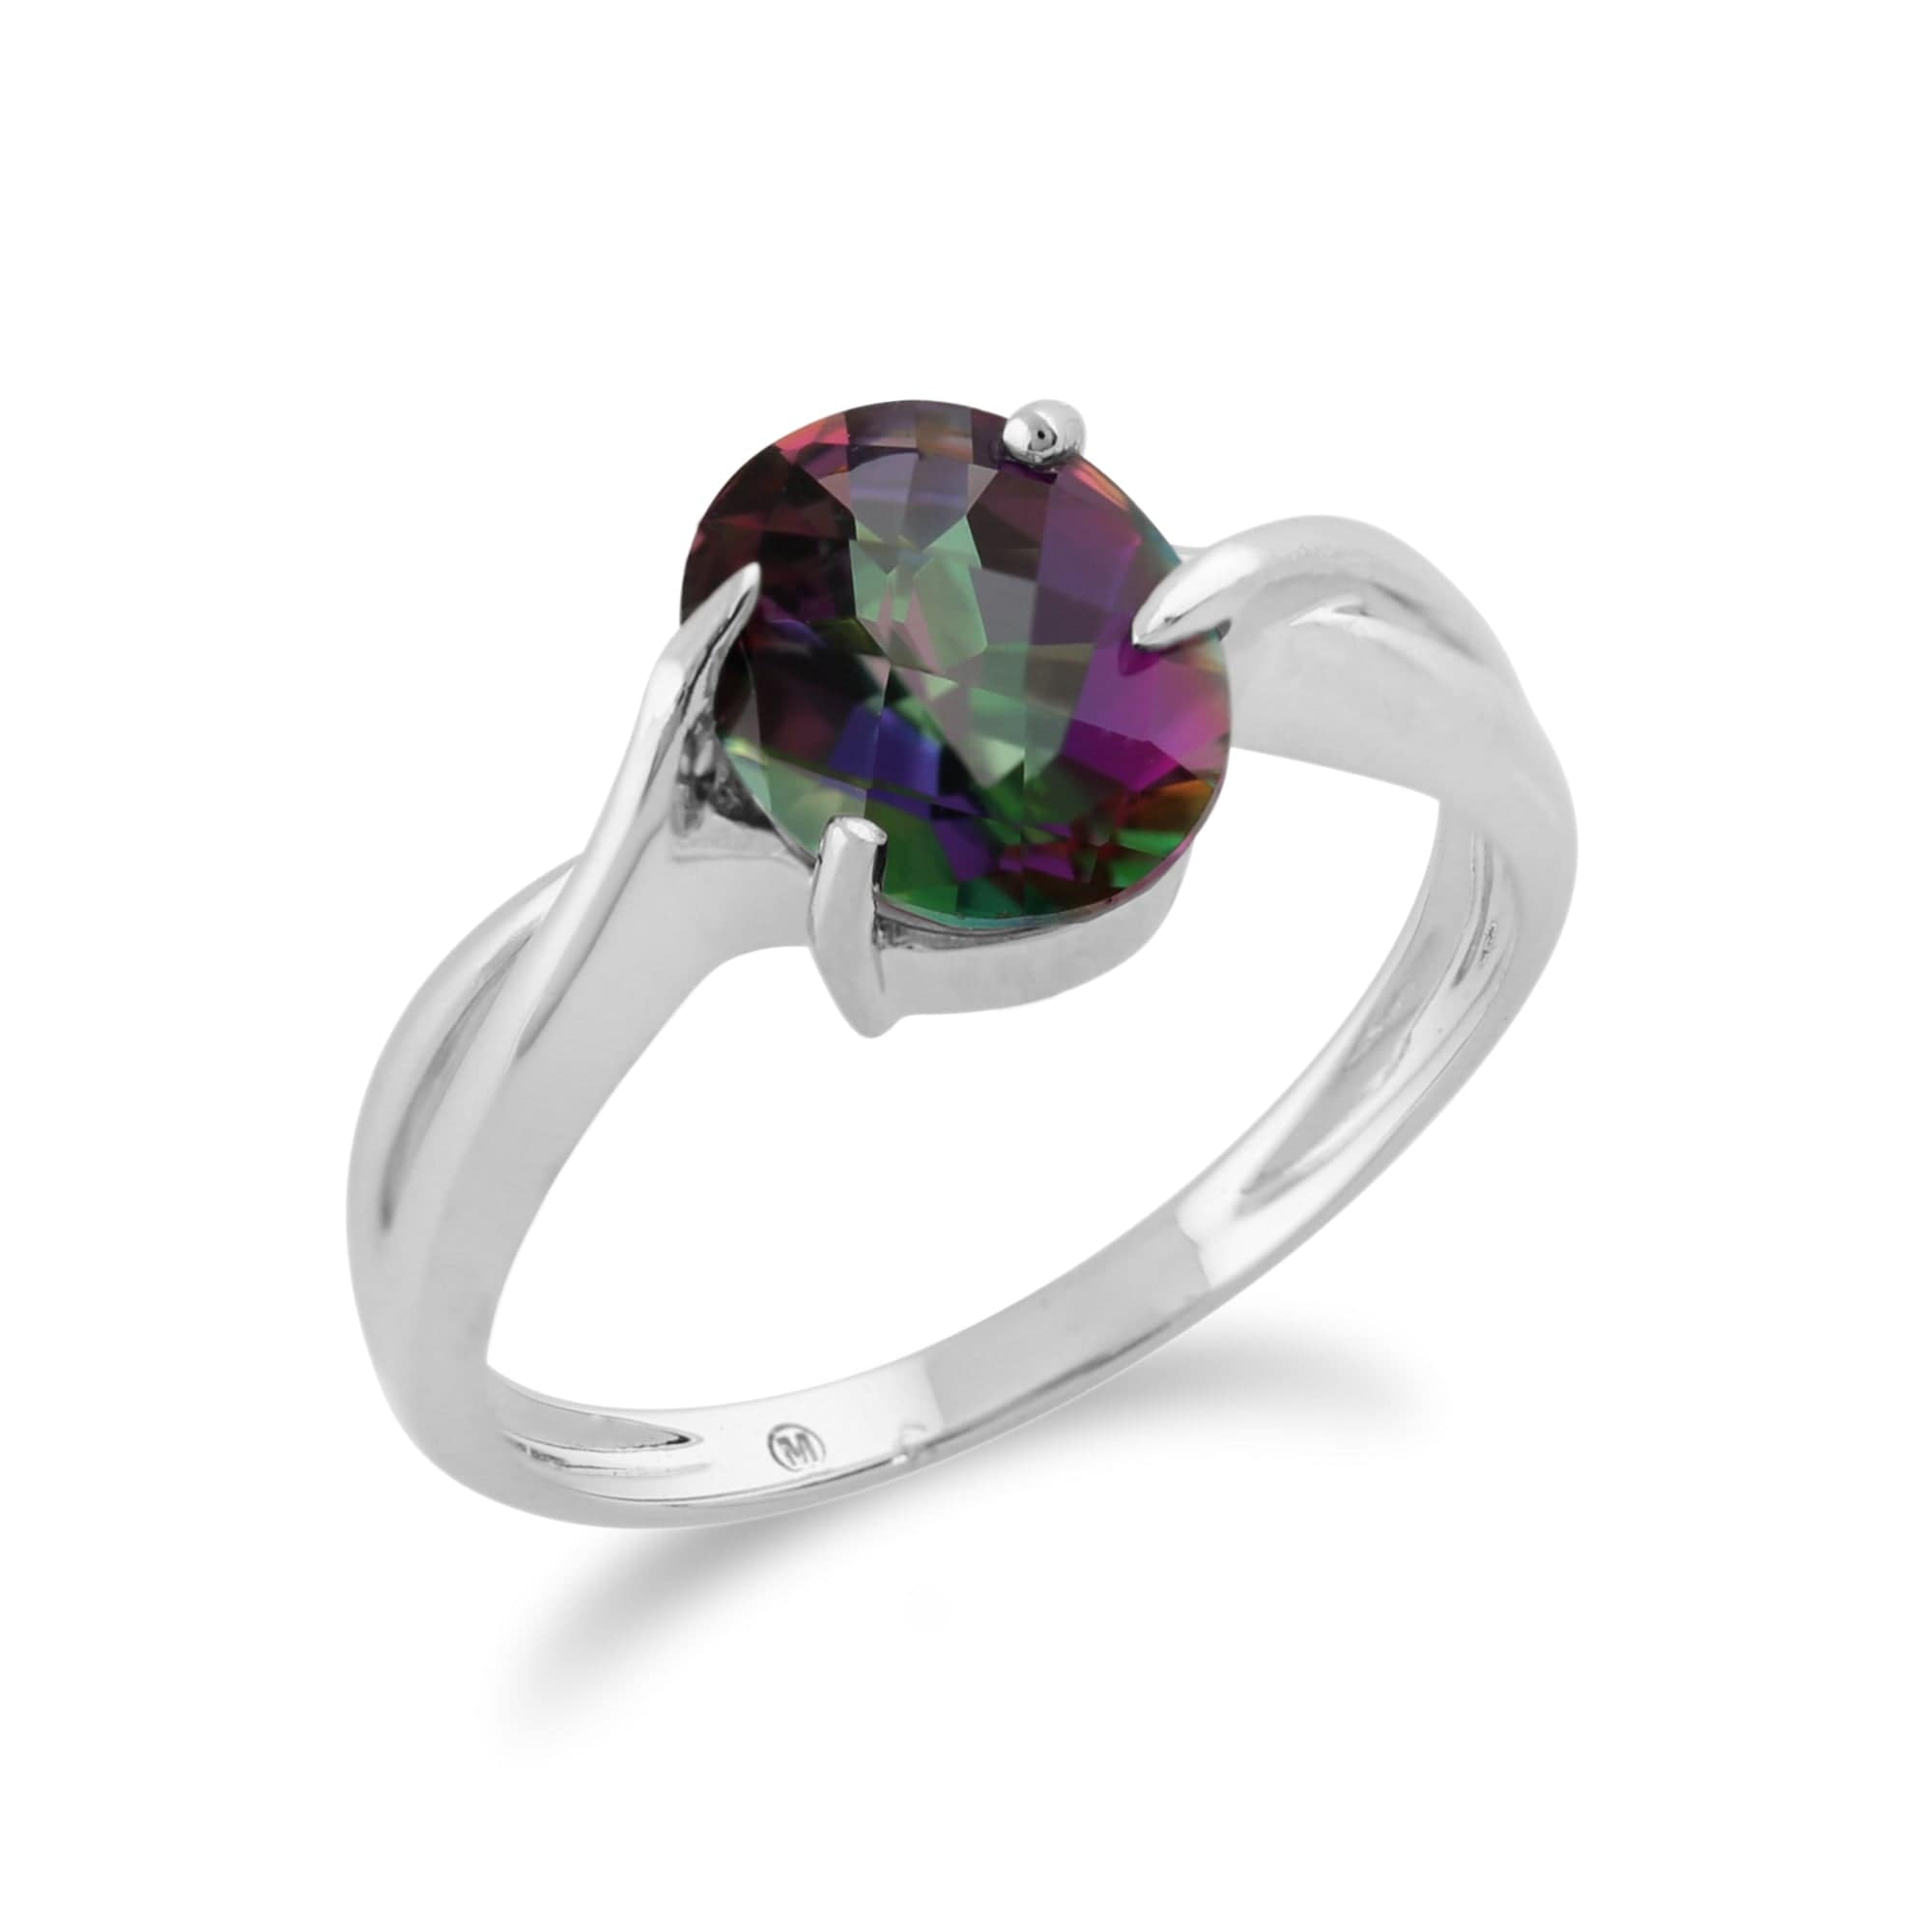 123R0806079 9ct White Gold 2.00ct Oval Cut Mystic Topaz Classic Single Stone Ring 2